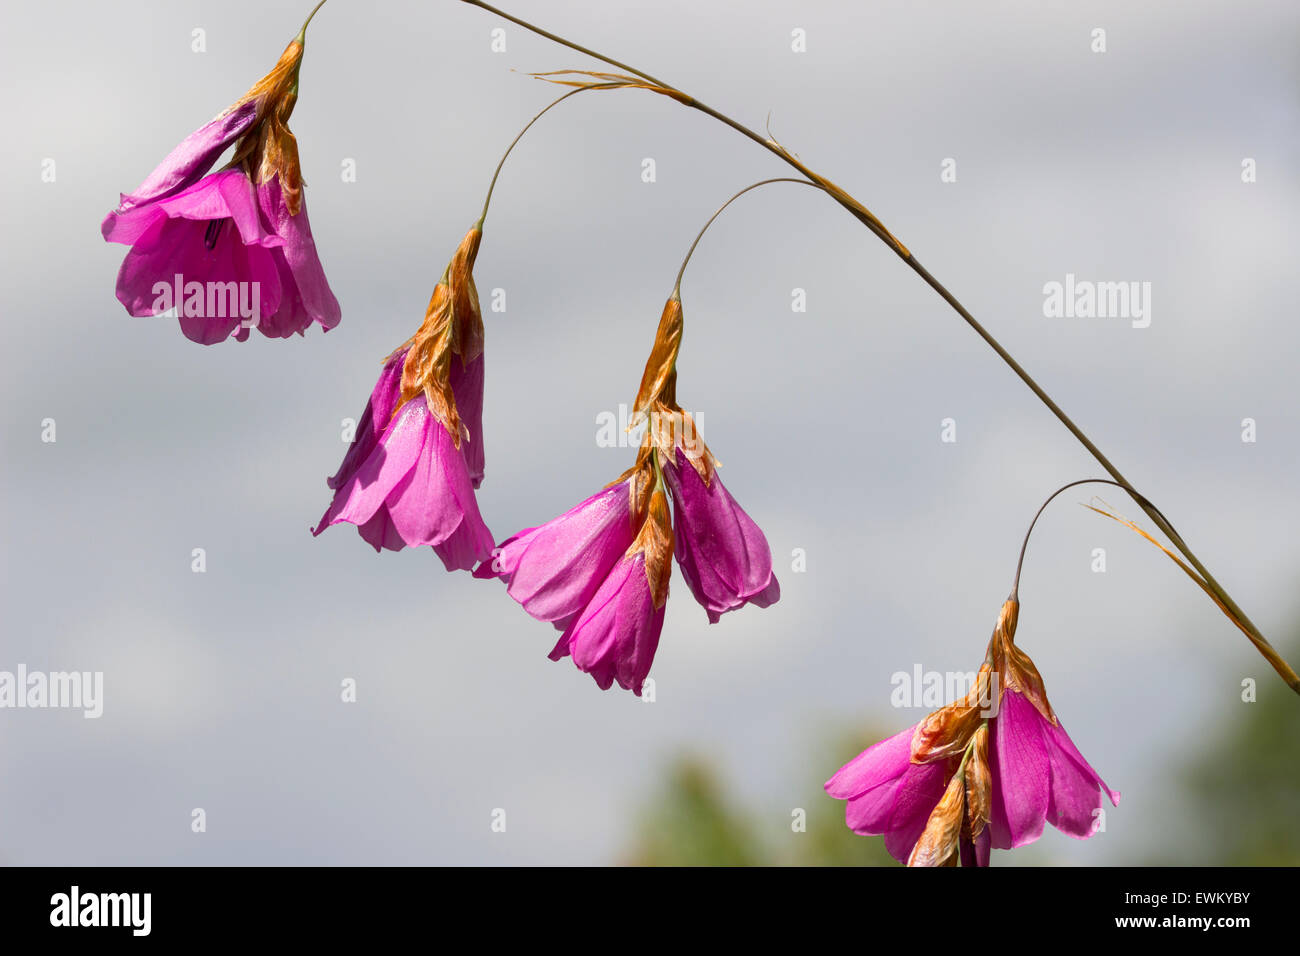 Dangling flowers of the Angel's fishing rod, Dierama pulcherrimum, against a cloudy sky Stock Photo